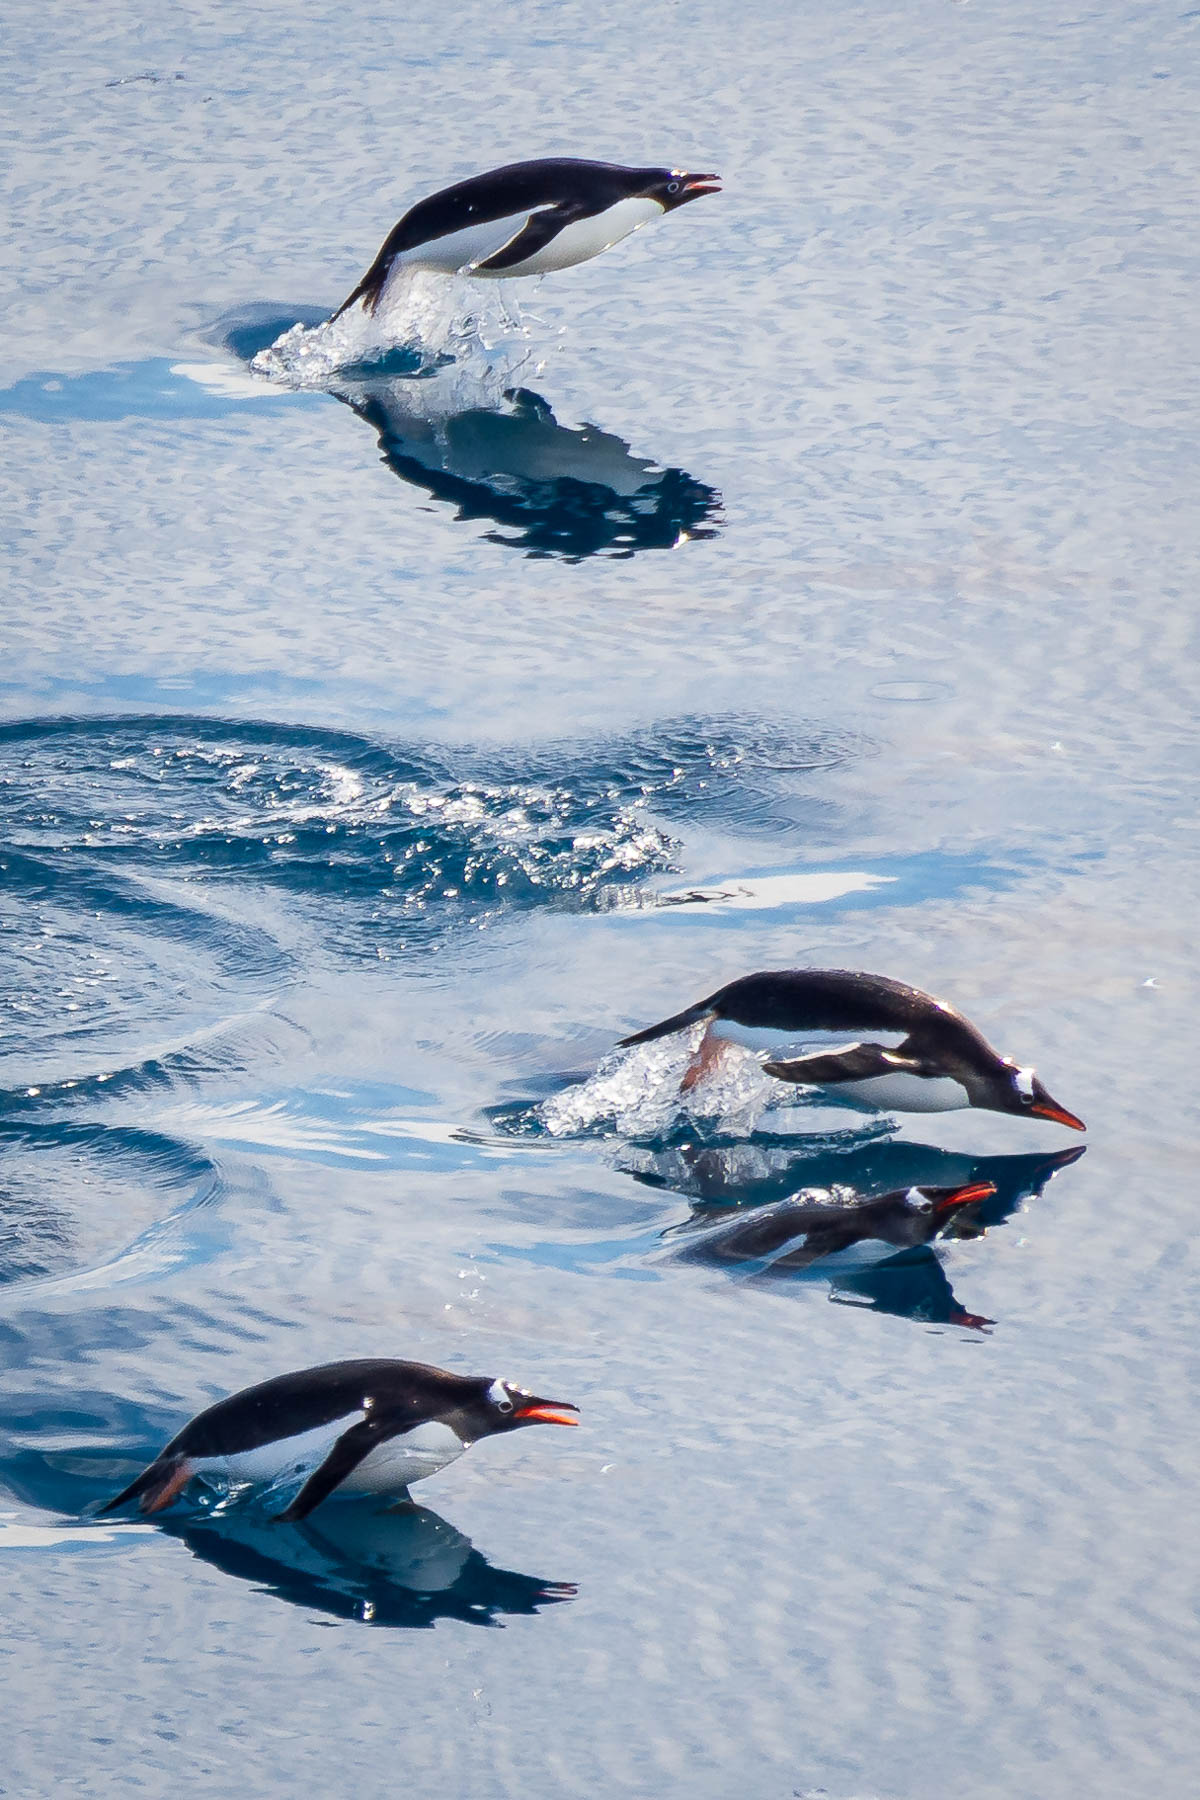 Penguins leaping out from the water taken from the ship.